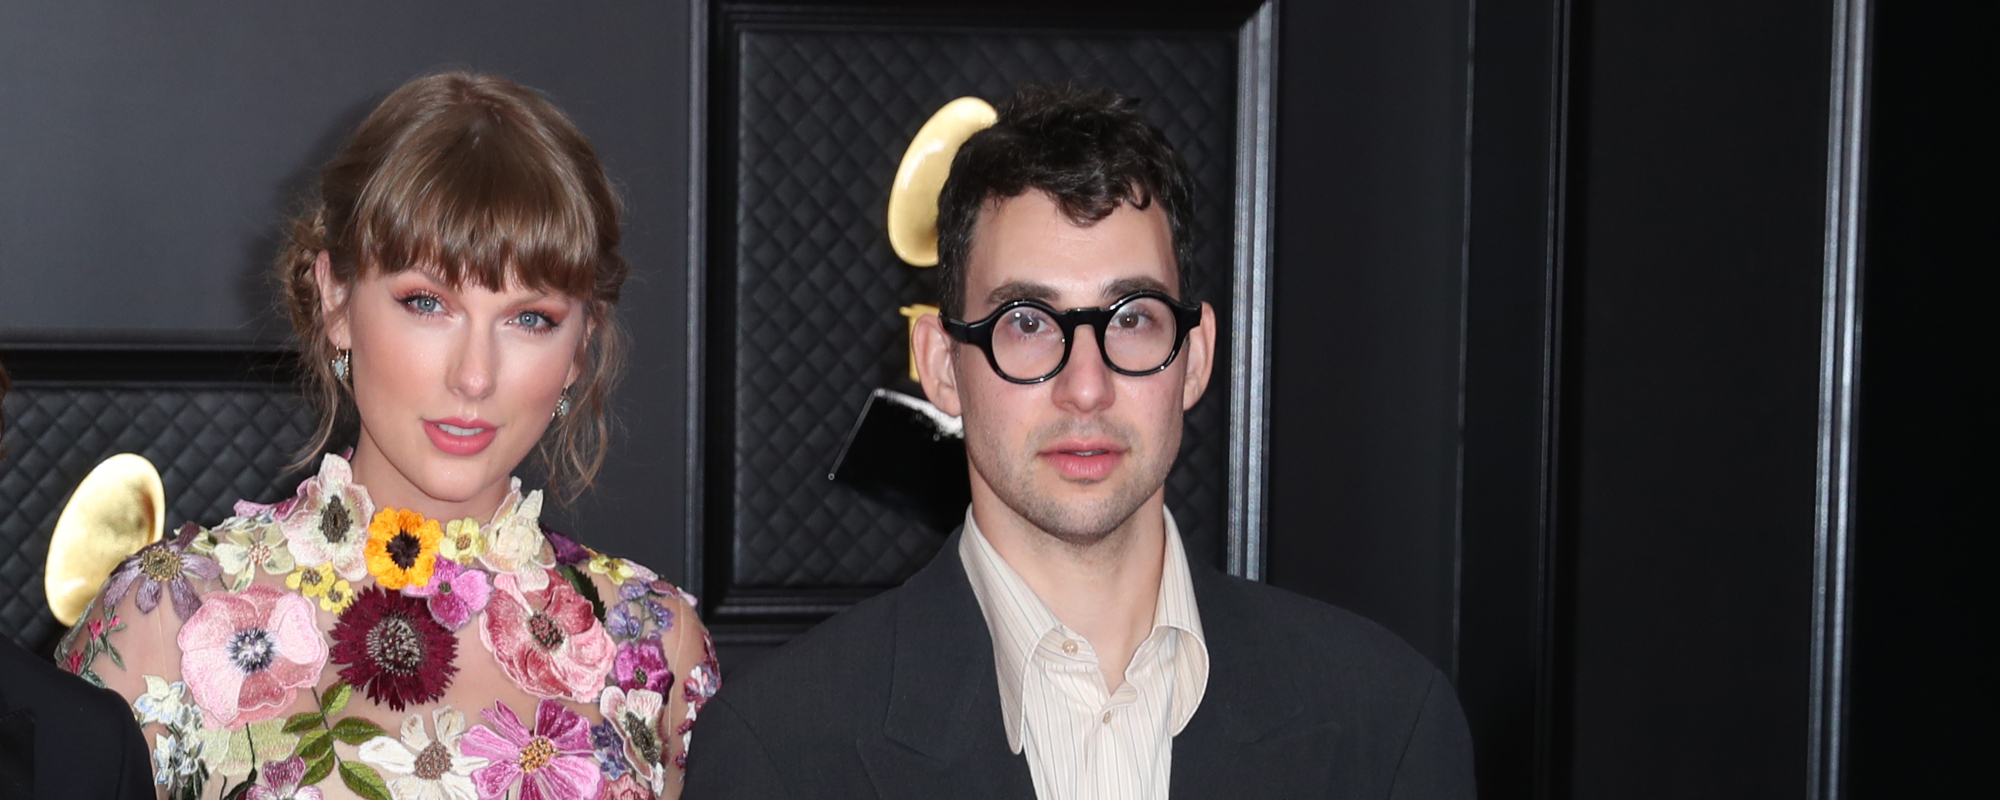 Jack Antonoff Joins the Heated Conversation on Music Industry Practices